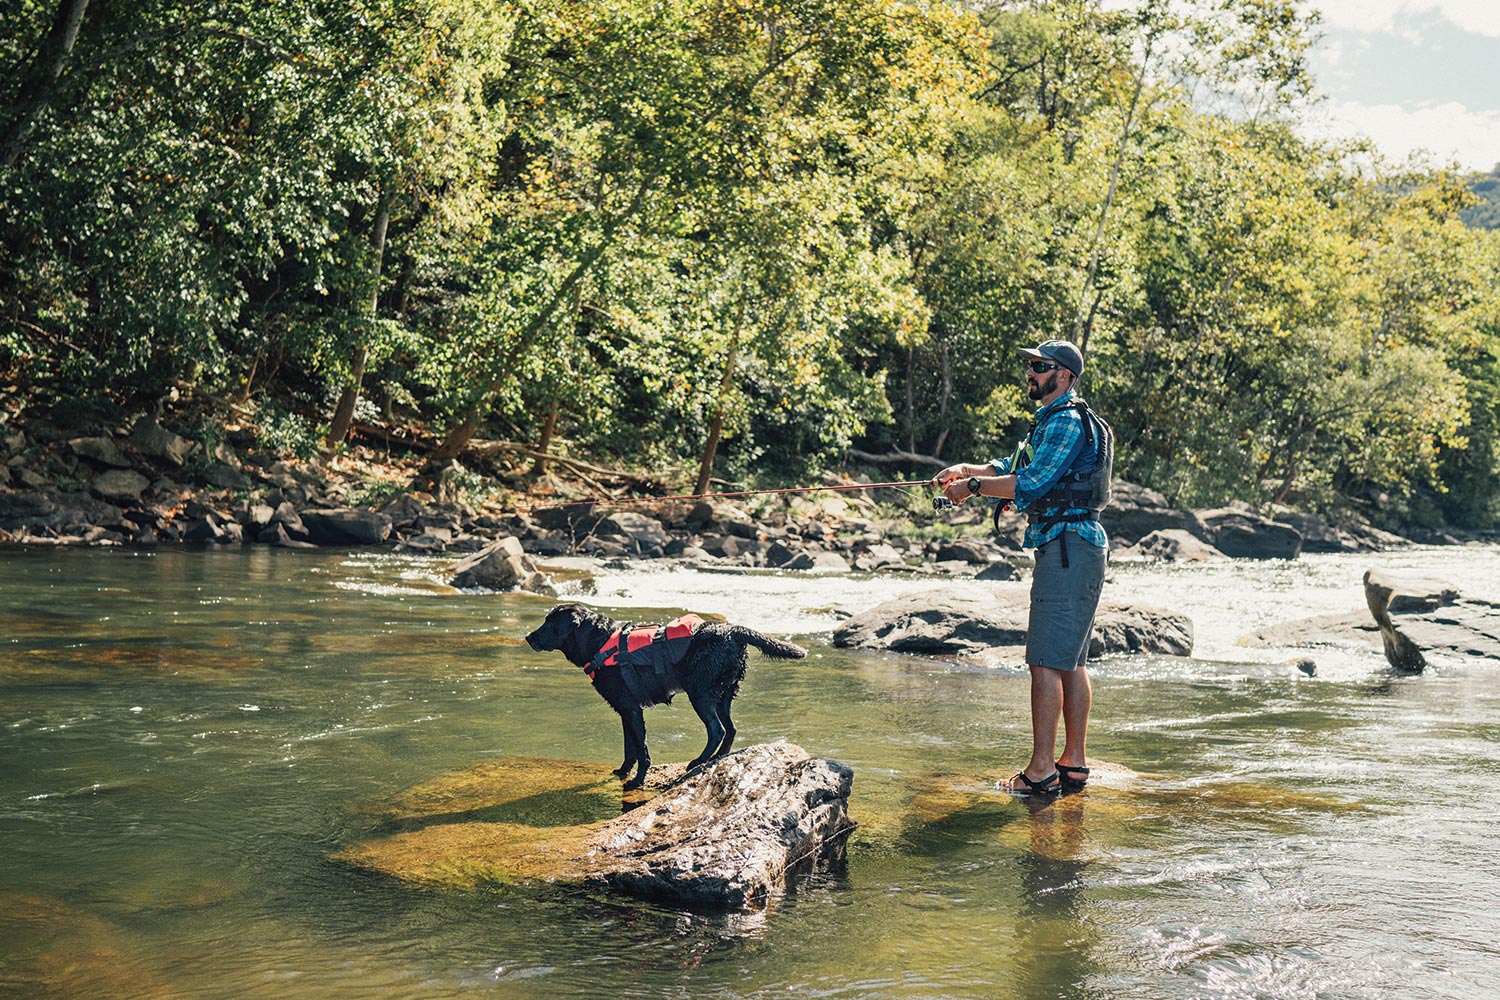 angler stands on rock and casts into shallow river; dog stands on rock in front of him